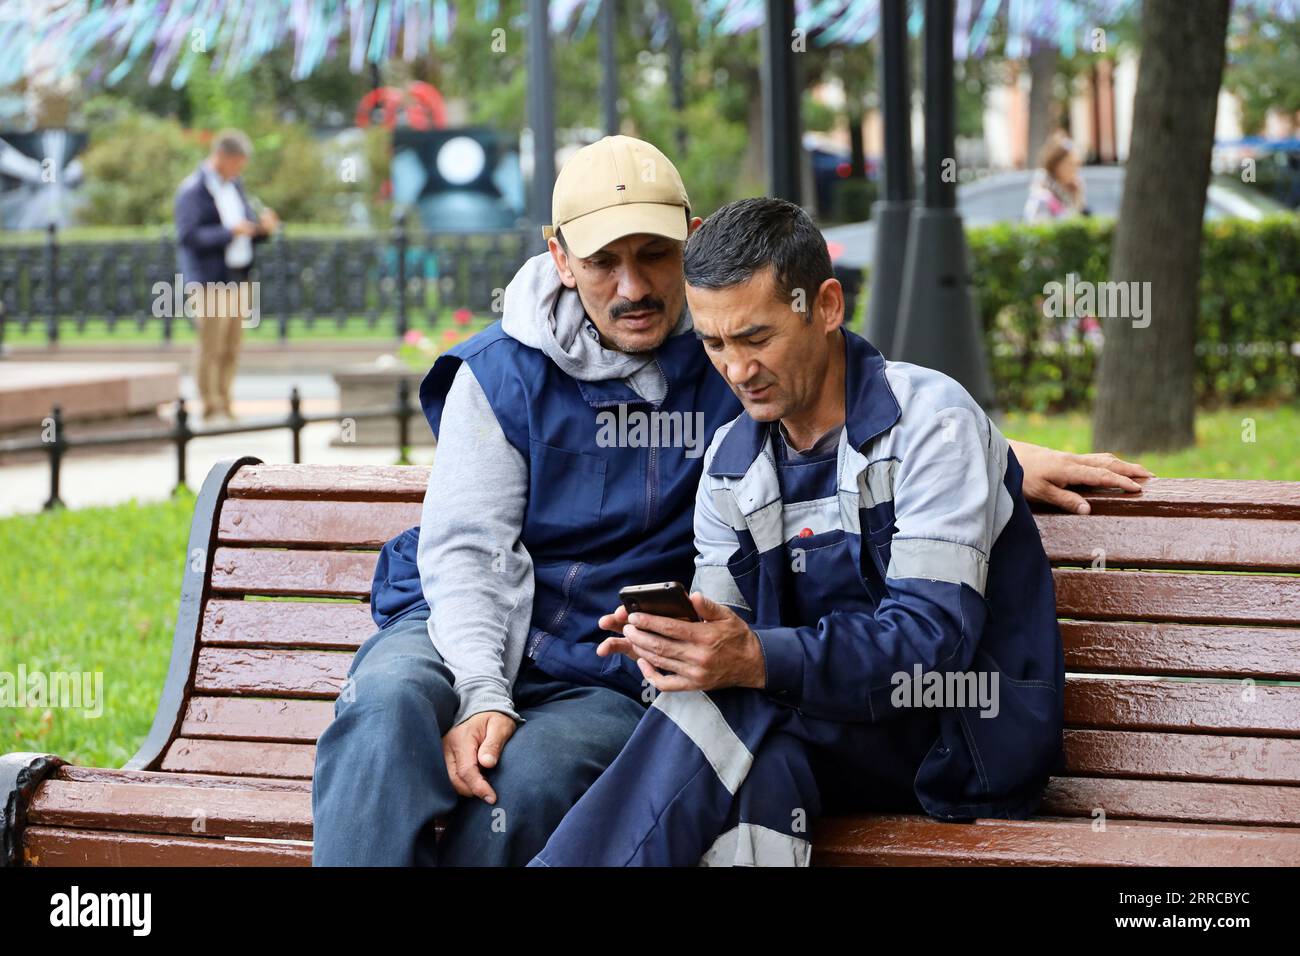 Public utilities workers sitting with smartphone on a bench in autumn city Stock Photo